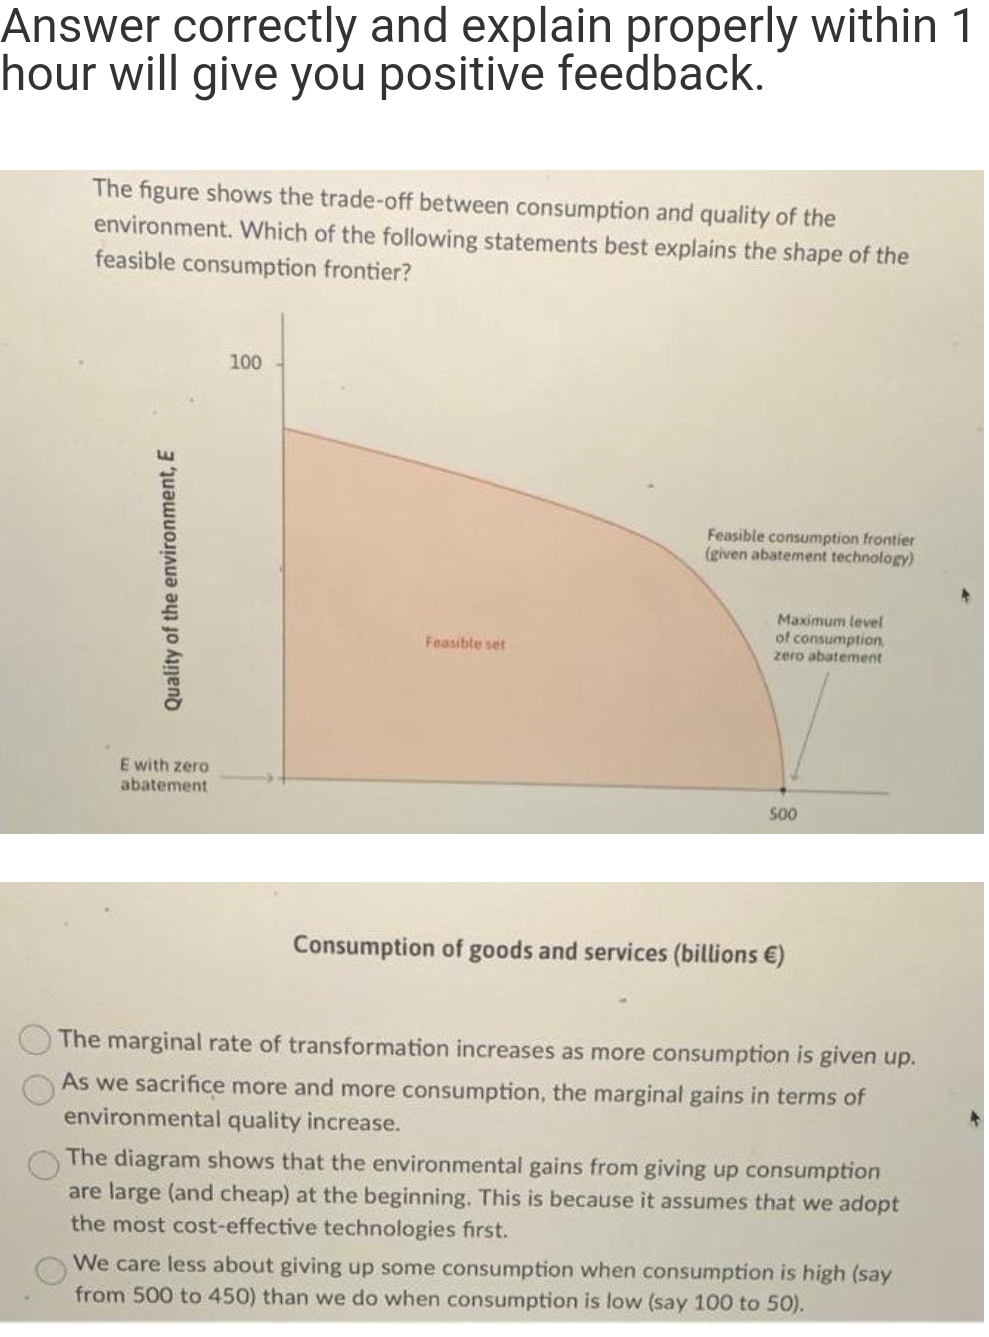 Answer correctly and explain properly within 1
hour will give you positive feedback.
The figure shows the trade-off between consumption and quality of the
environment. Which of the following statements best explains the shape of the
feasible consumption frontier?
100
Feasible consumption frontier
(given abatement technology)
Maximum level
of consumption,
zero abatement
Feasible set
E with zero
abatement
50
Consumption of goods and services (billions €)
The marginal rate of transformation increases as more consumption is given up.
As we sacrifice more and more consumption, the marginal gains in terms of
environmental quality increase.
The diagram shows that the environmental gains from giving up consumption
are large (and cheap) at the beginning. This is because it assumes that we adopt
the most cost-effective technologies first.
We care less about giving up some consumption when consumption is high (say
from 500 to 450) than we do when consumption is low (say 100 to 50).
Quality of the environment, E
